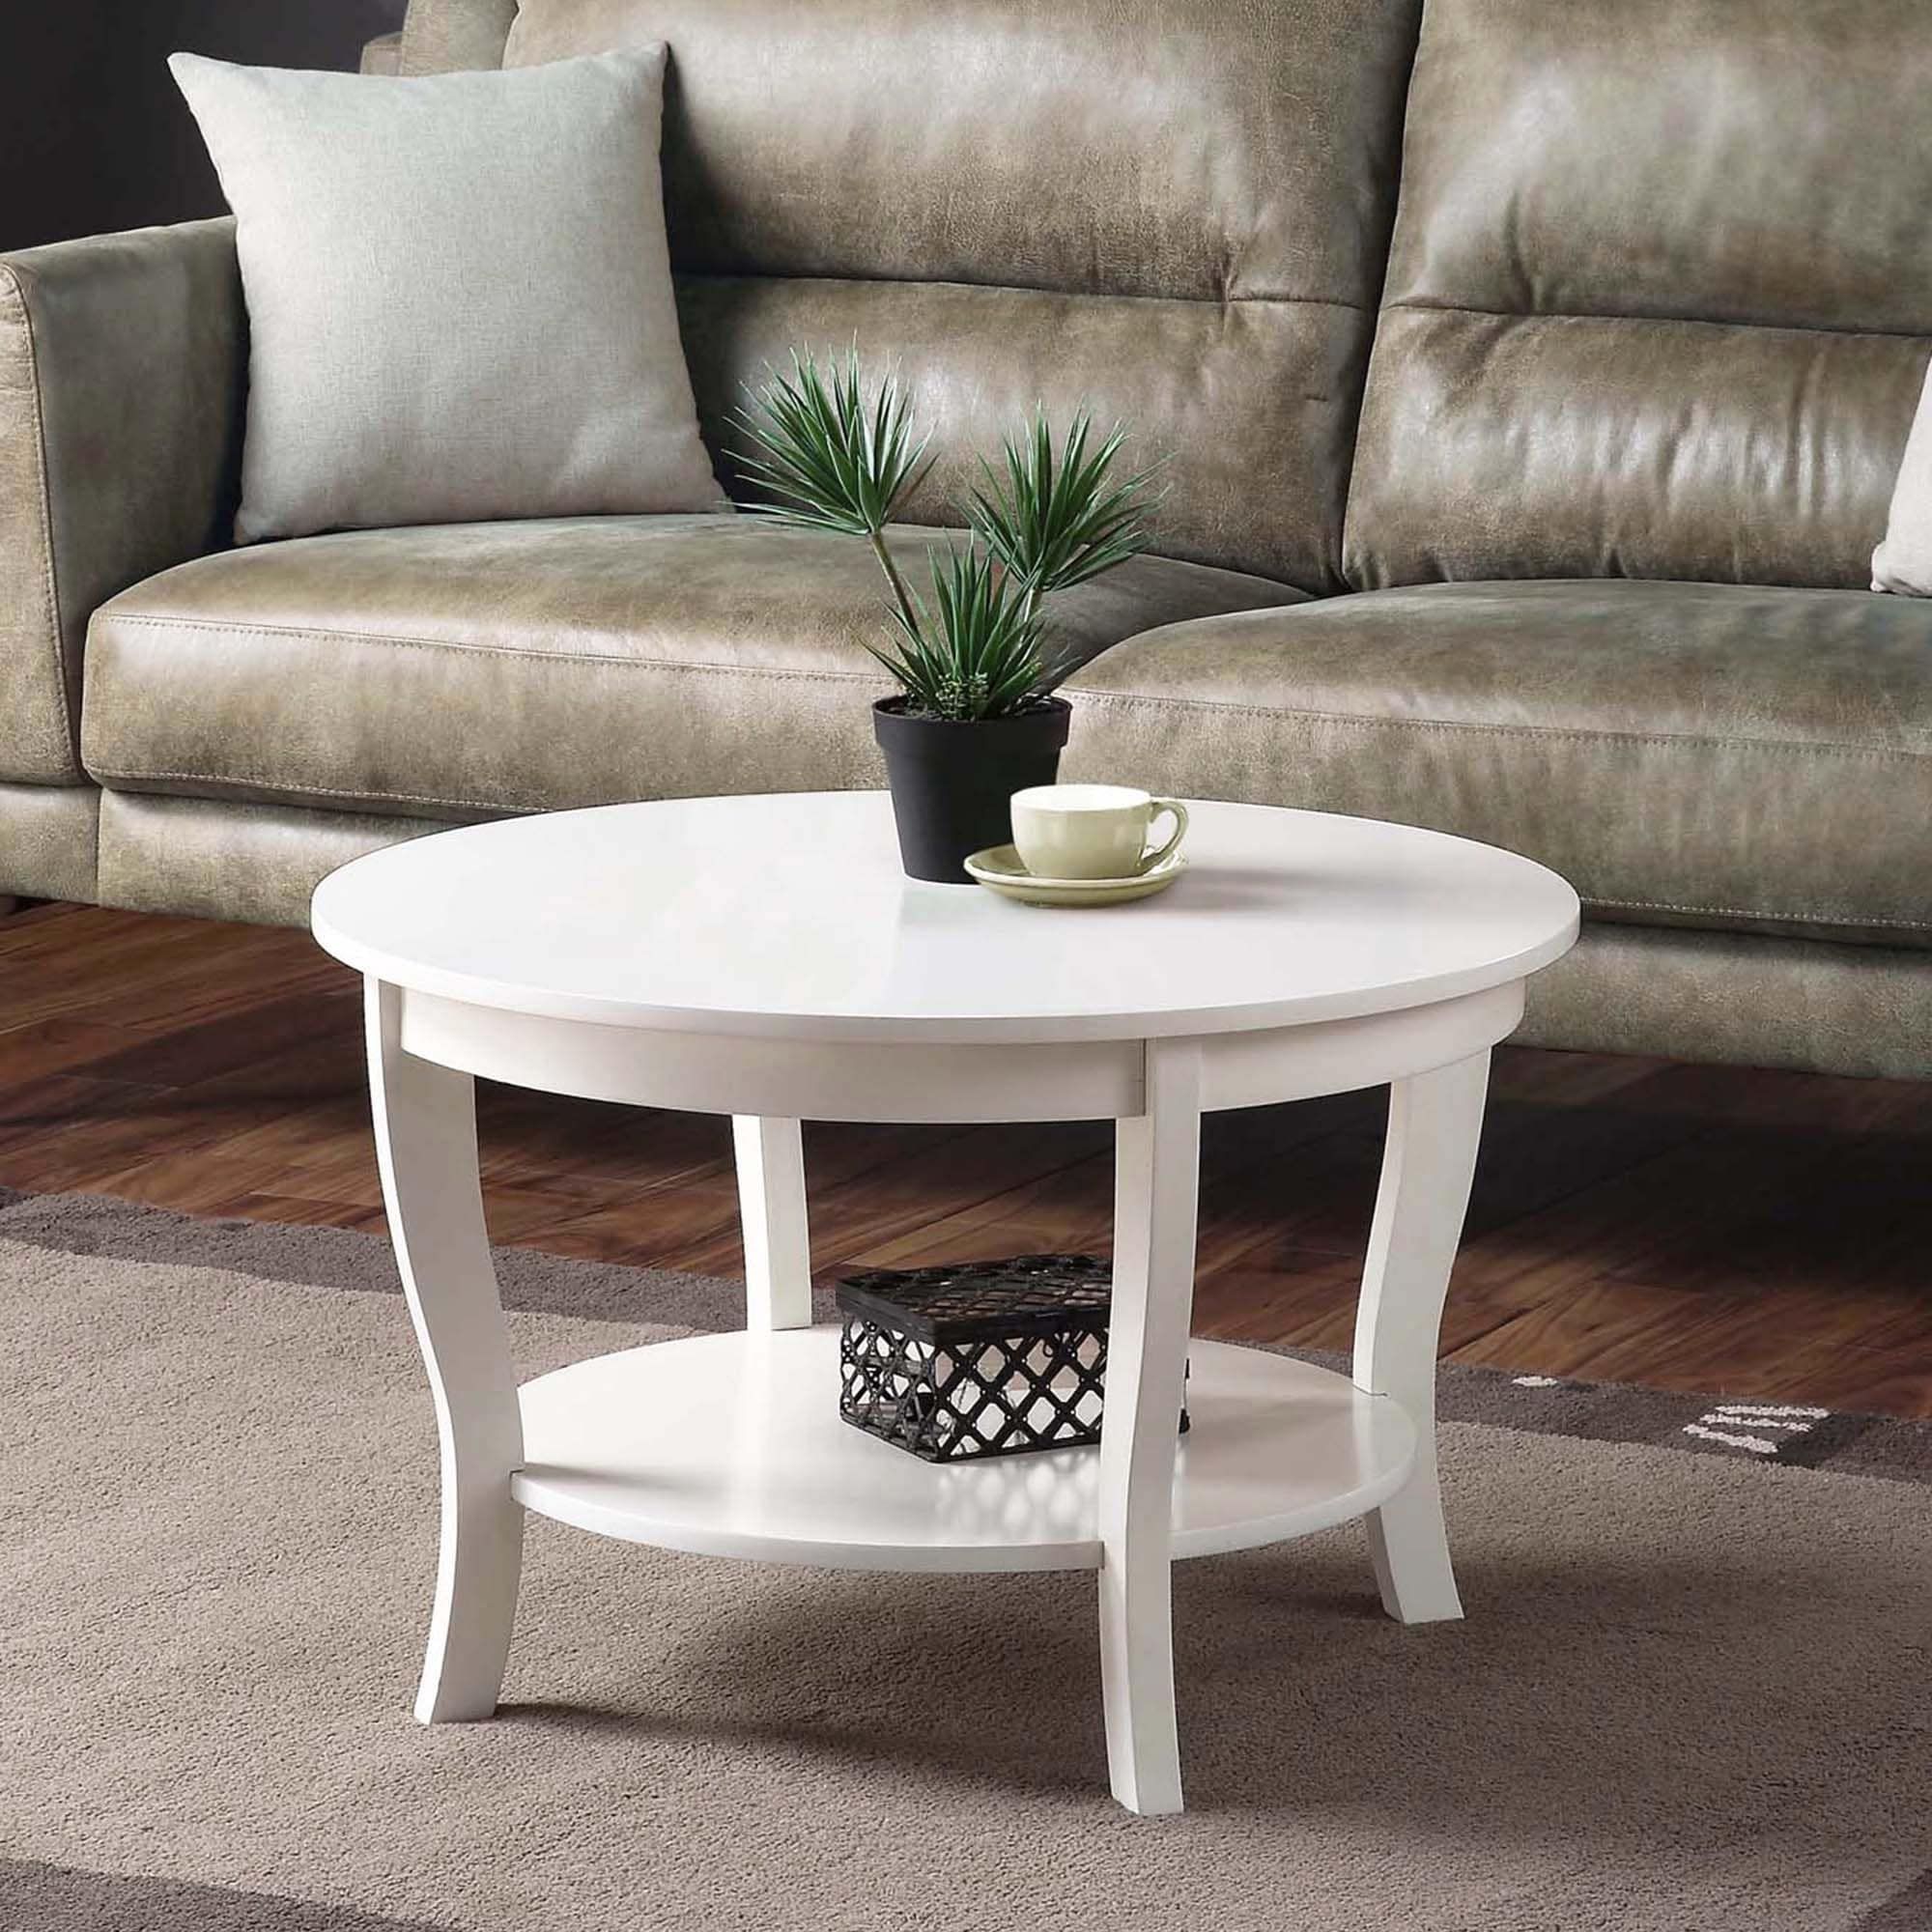 2019 Convenience Concepts American Heritage Round Coffee Table With Shelf – On  Sale – Bed Bath & Beyond – 28860374 In American Heritage Round Coffee Tables (Photo 10 of 10)